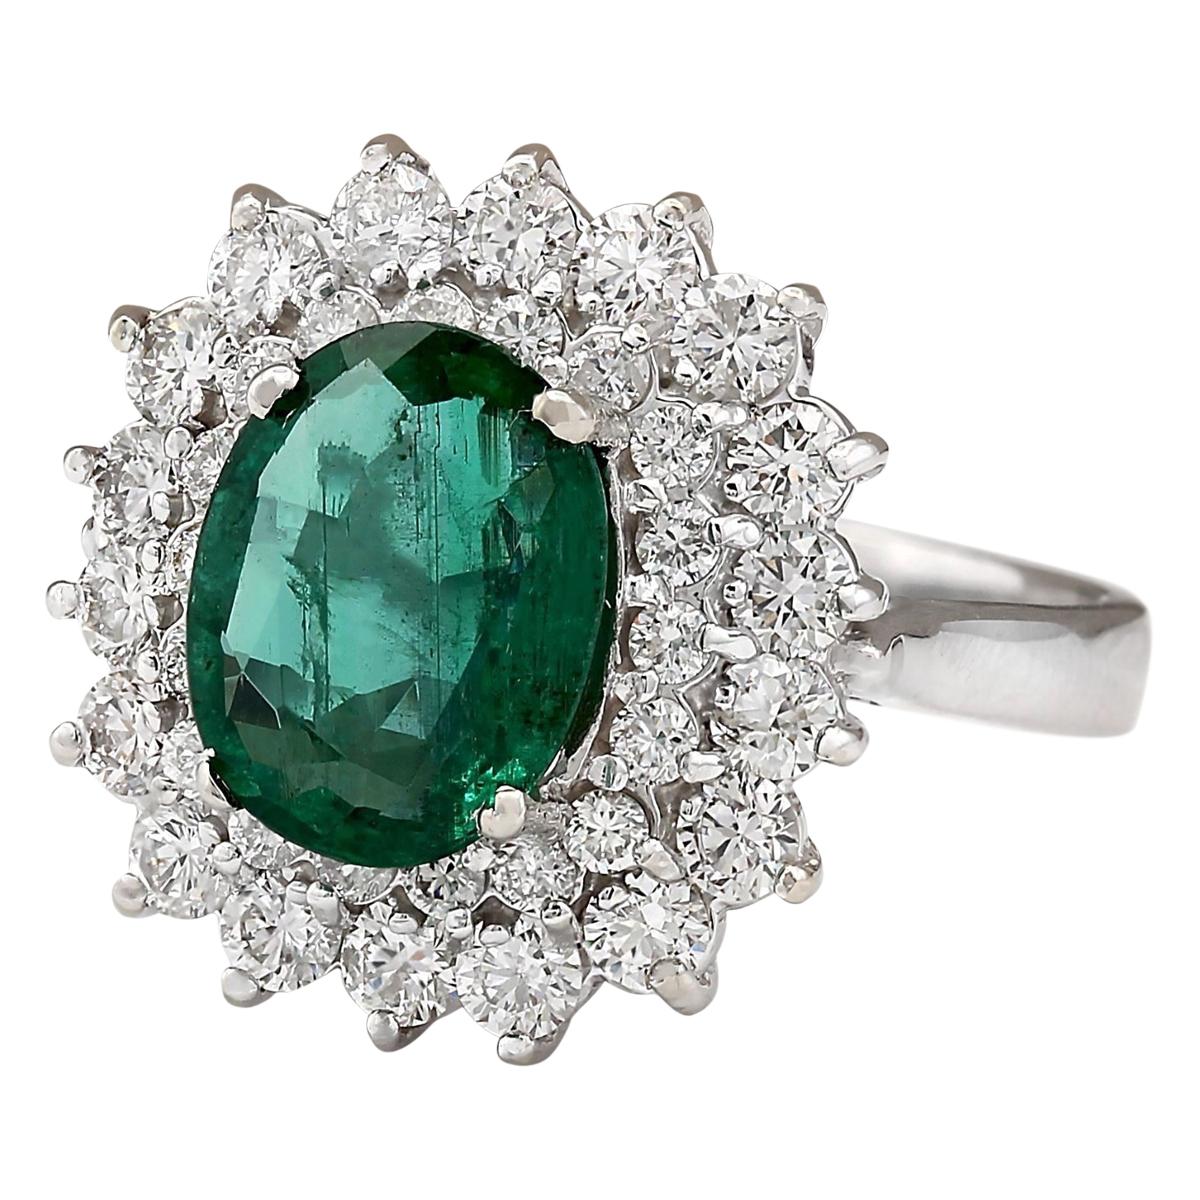 Stamped: 14K White Gold
Total Ring Weight: 6.5 Grams
Total Natural Emerald Weight is 2.58 Carat (Measures: 10.00x8.00 mm)
Color: Green
Total Natural Diamond Weight is 1.40 Carat
Color: F-G, Clarity: VS2-SI1
Face Measures: 17.90x16.80 mm
Sku: